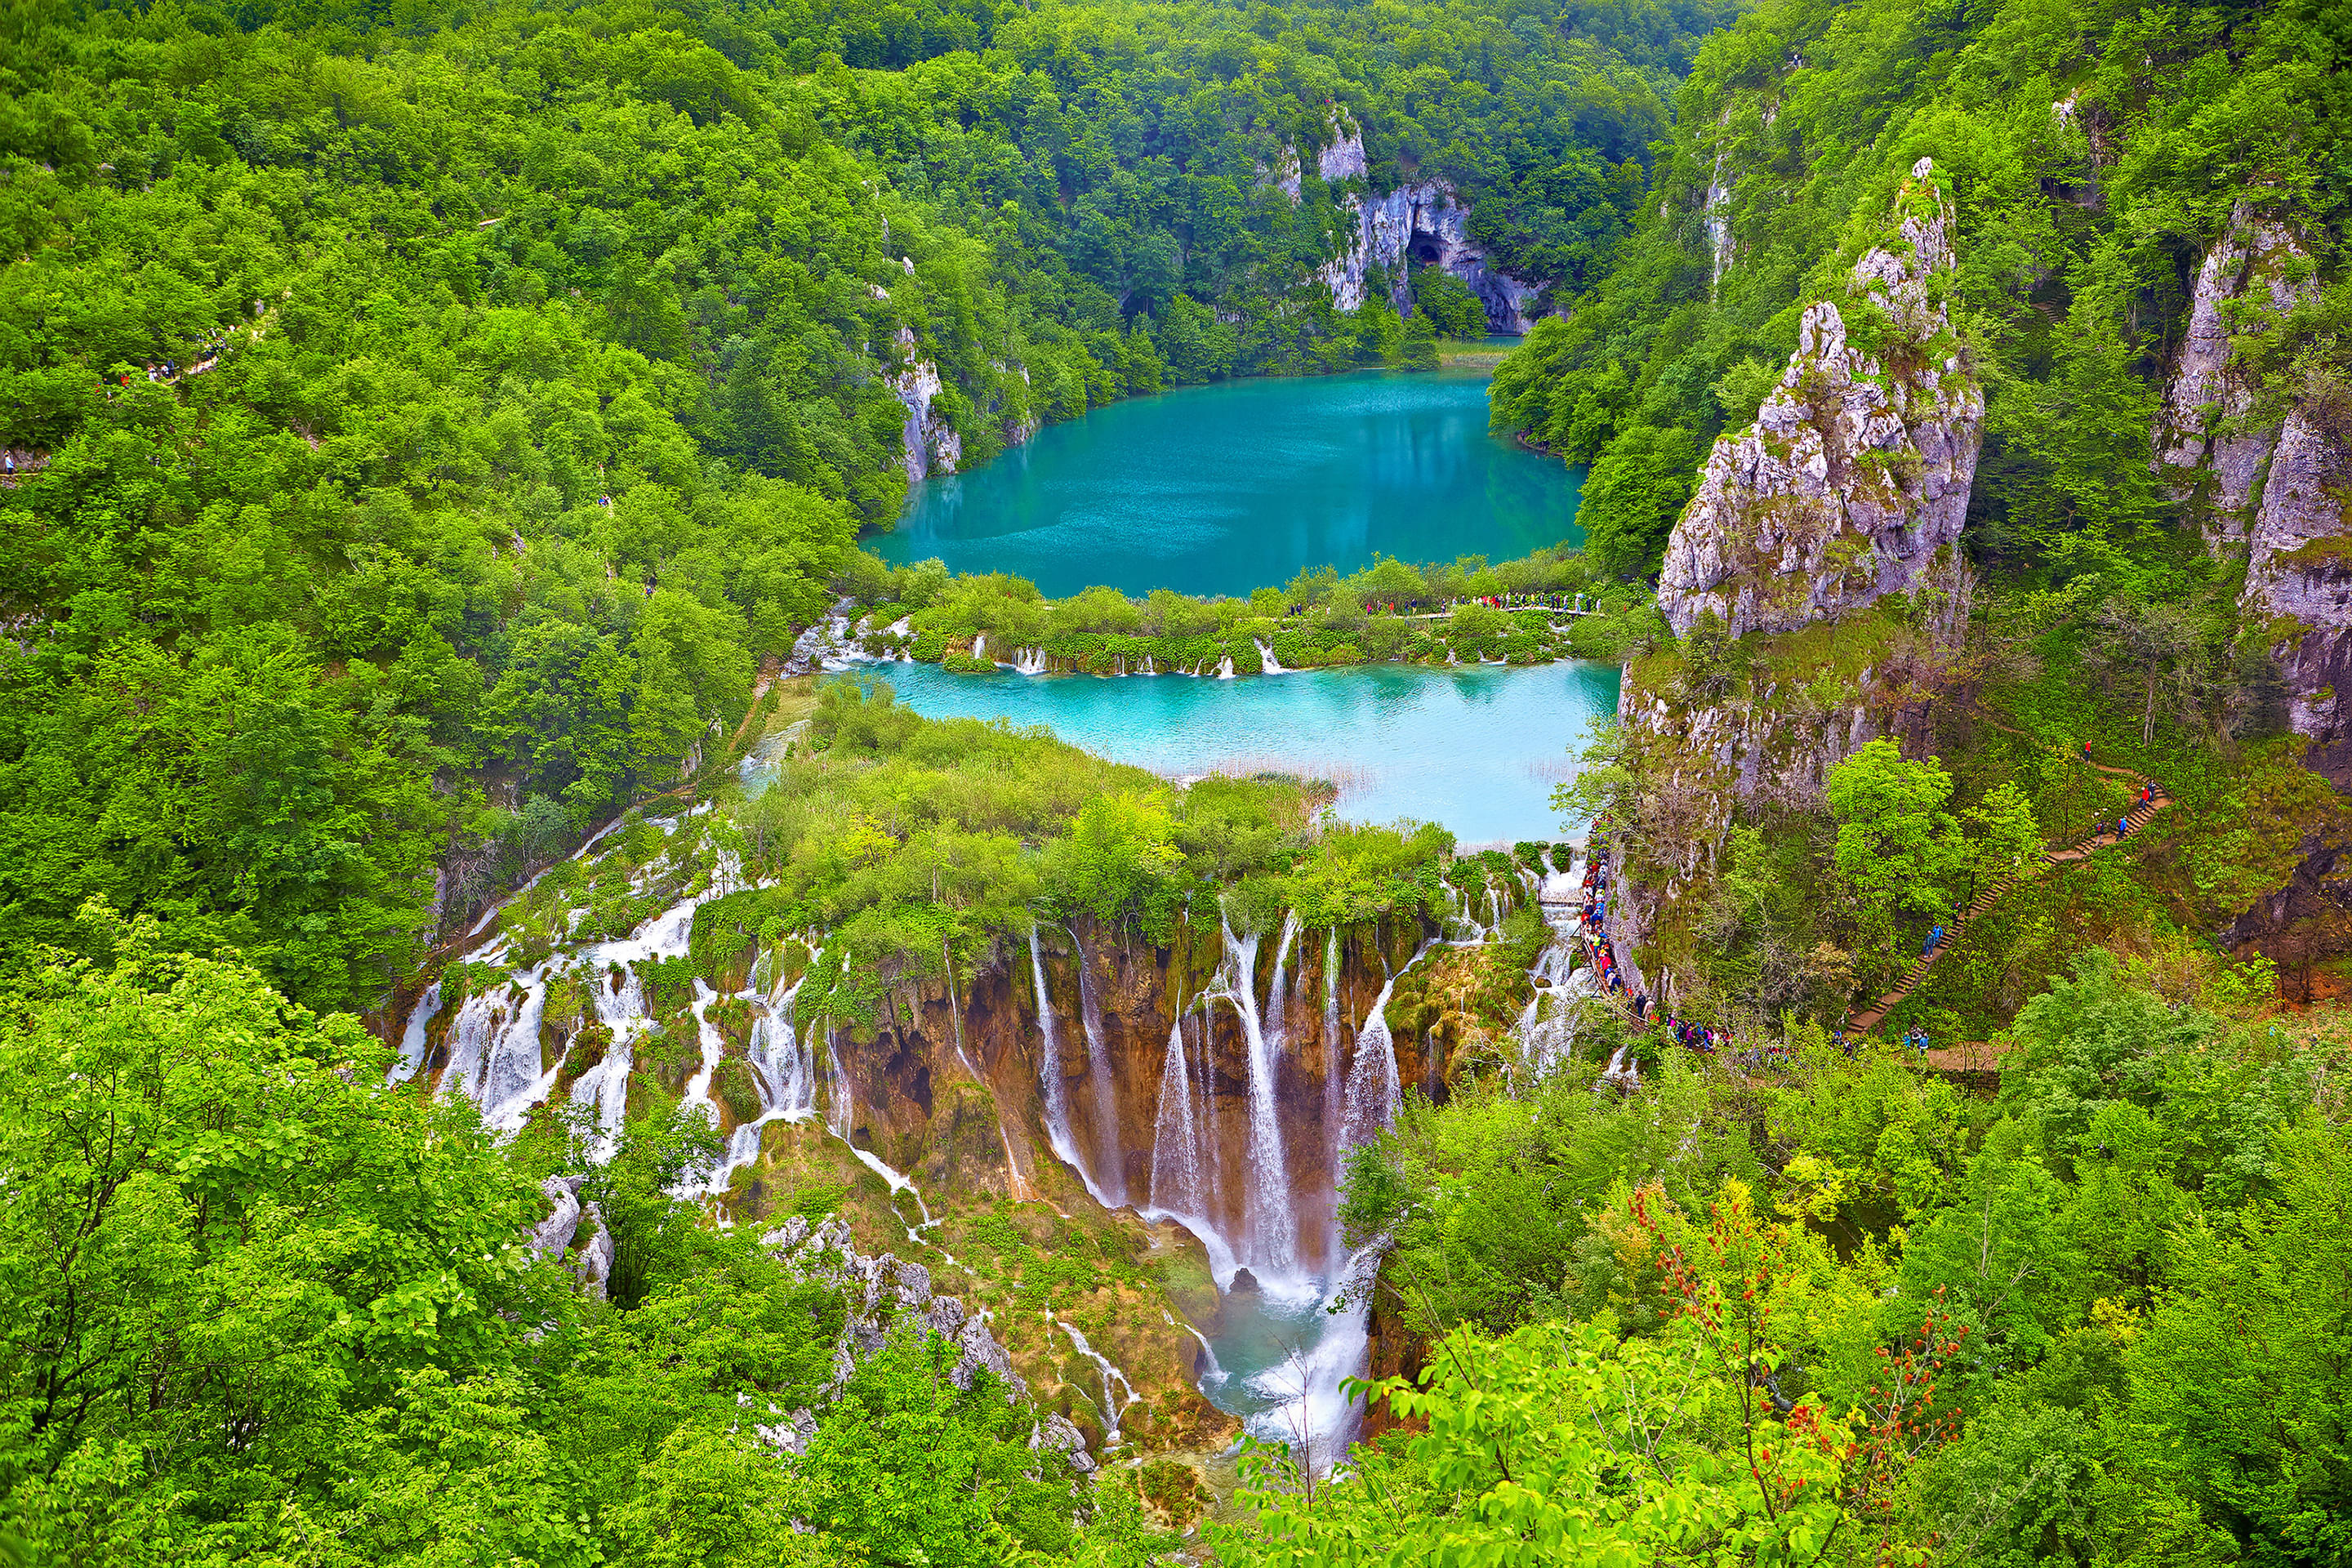 Plitvice Lakes National Park Overview